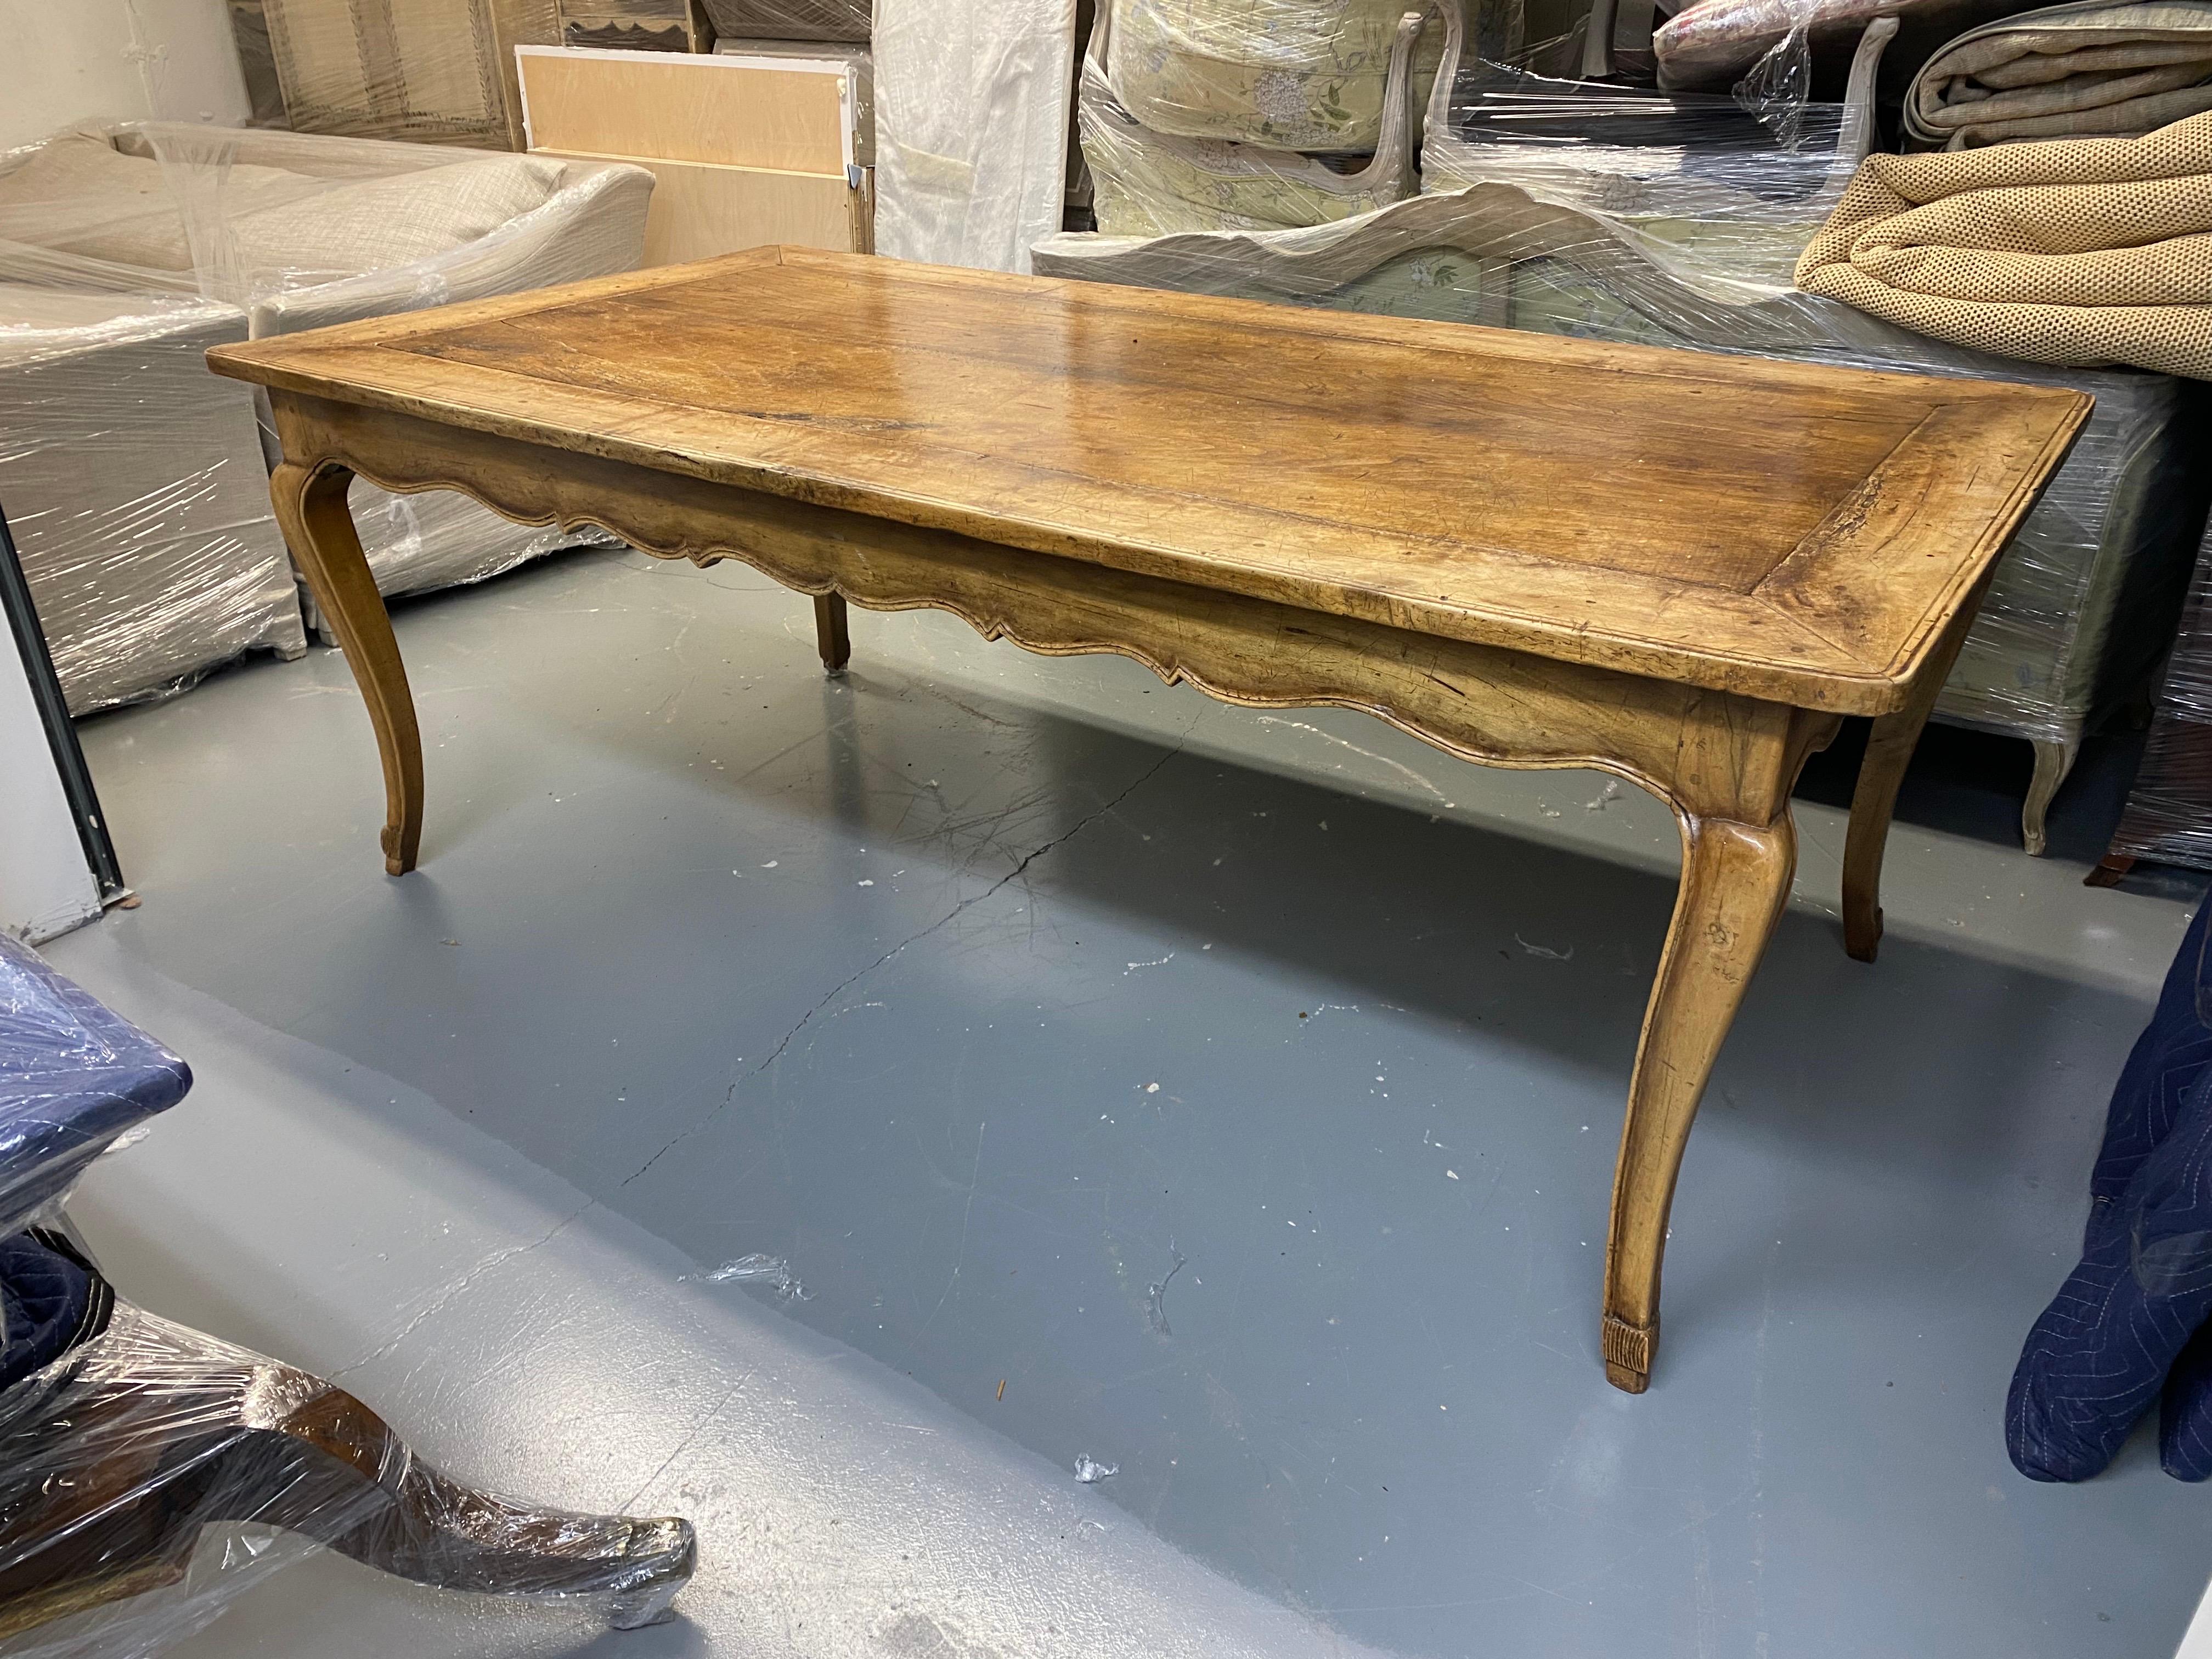 18th Century French Provincial Cherrywood & Oak Dining Table
A lovely worn patina French farm table. Center boards in oak, frame in cherrywood. 18th Century. Undulating apron, cabriole legs, peg joinery. General wear throughout consistent with age